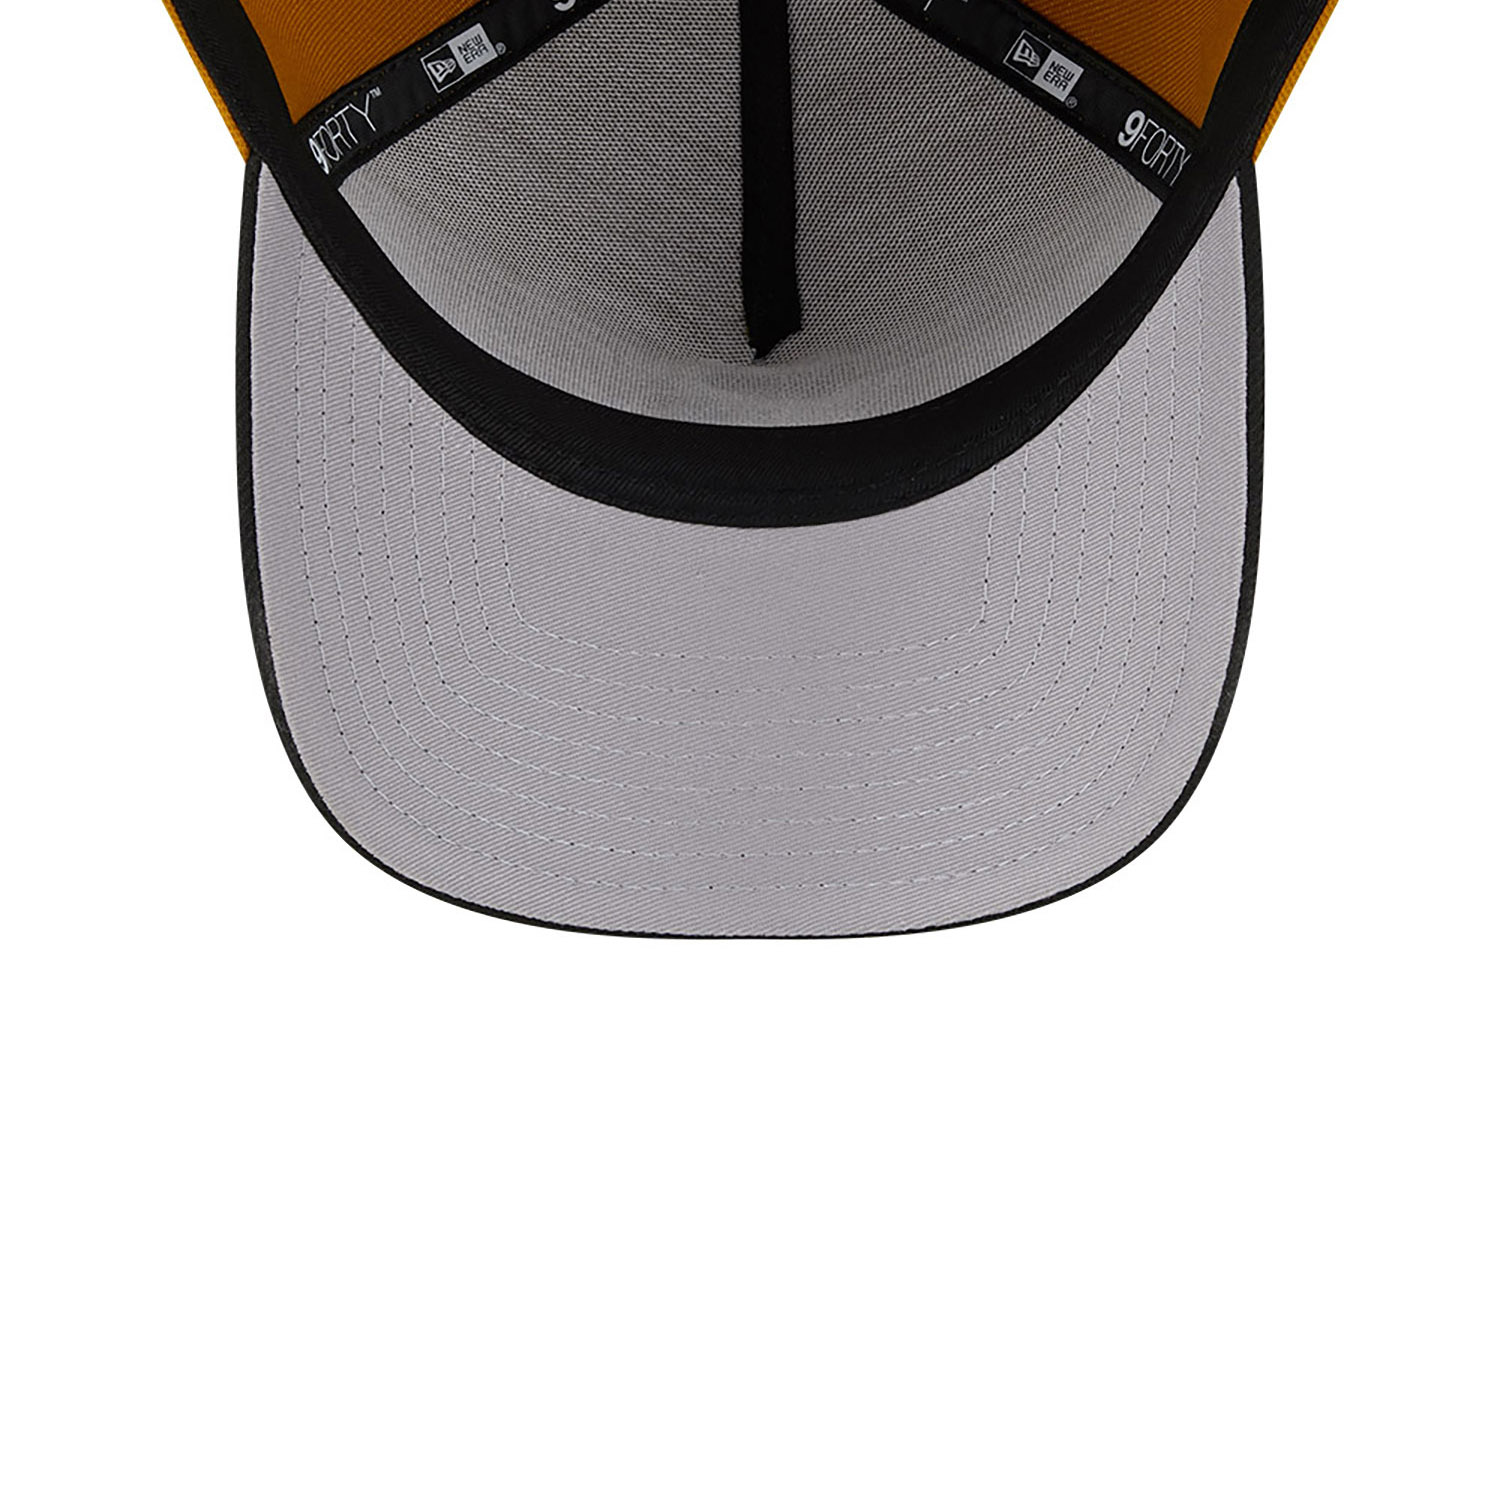 San Diego Padres Rustic Fall Gold A-Frame 9FORTY Adjustable Cap